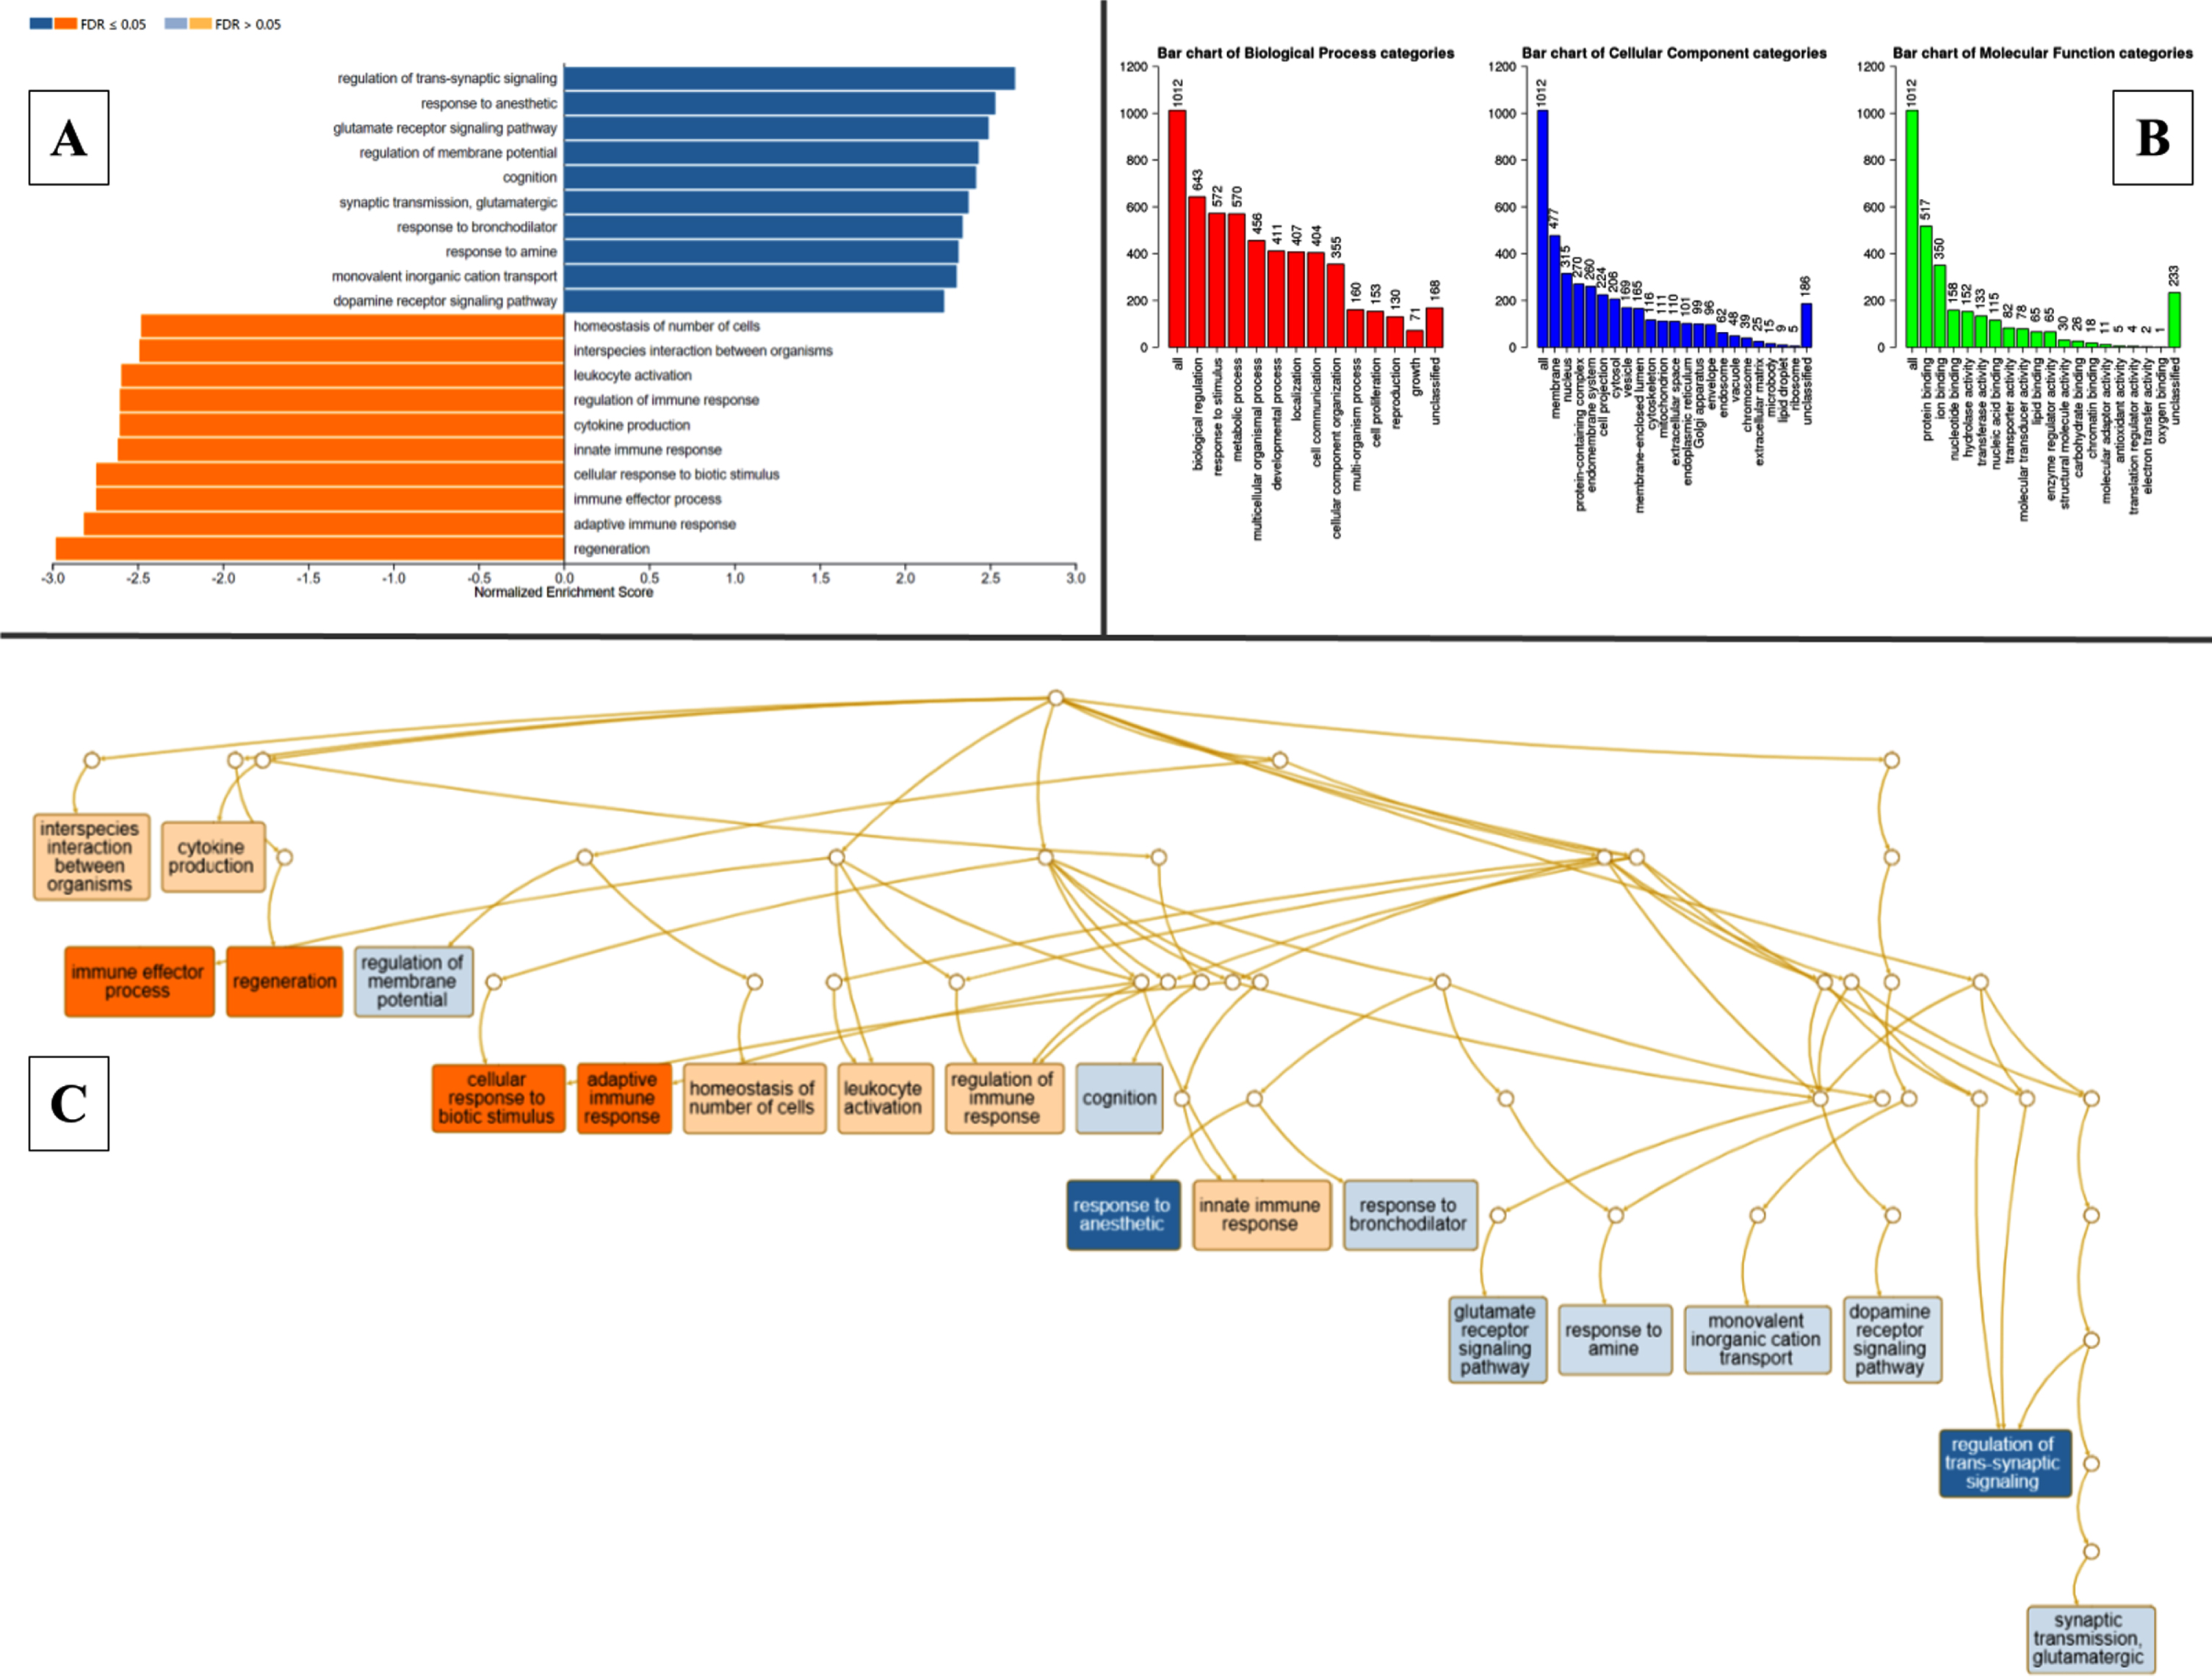 Gene ontology classification, pathway enrichment analysis- clusters of highly significant pathways based on KEGG database, acyclic graph of enriched processes based on GO biological processes. WebGestalt outputs. A) Pathway enrichment analysis of DEGs between MCAo and Sham animals, resulting in multiple clusters of significantly altered pathways based on KEGG database. B) Gene ontology classification. Each bar represents an ontology category and the heigh signifies the number of DEGs observed under each category. C) Branching graph depicts functional interaction between various GO categories, where the steel blue colored categories are positively related while the deep orange-colored categories are negatively related.